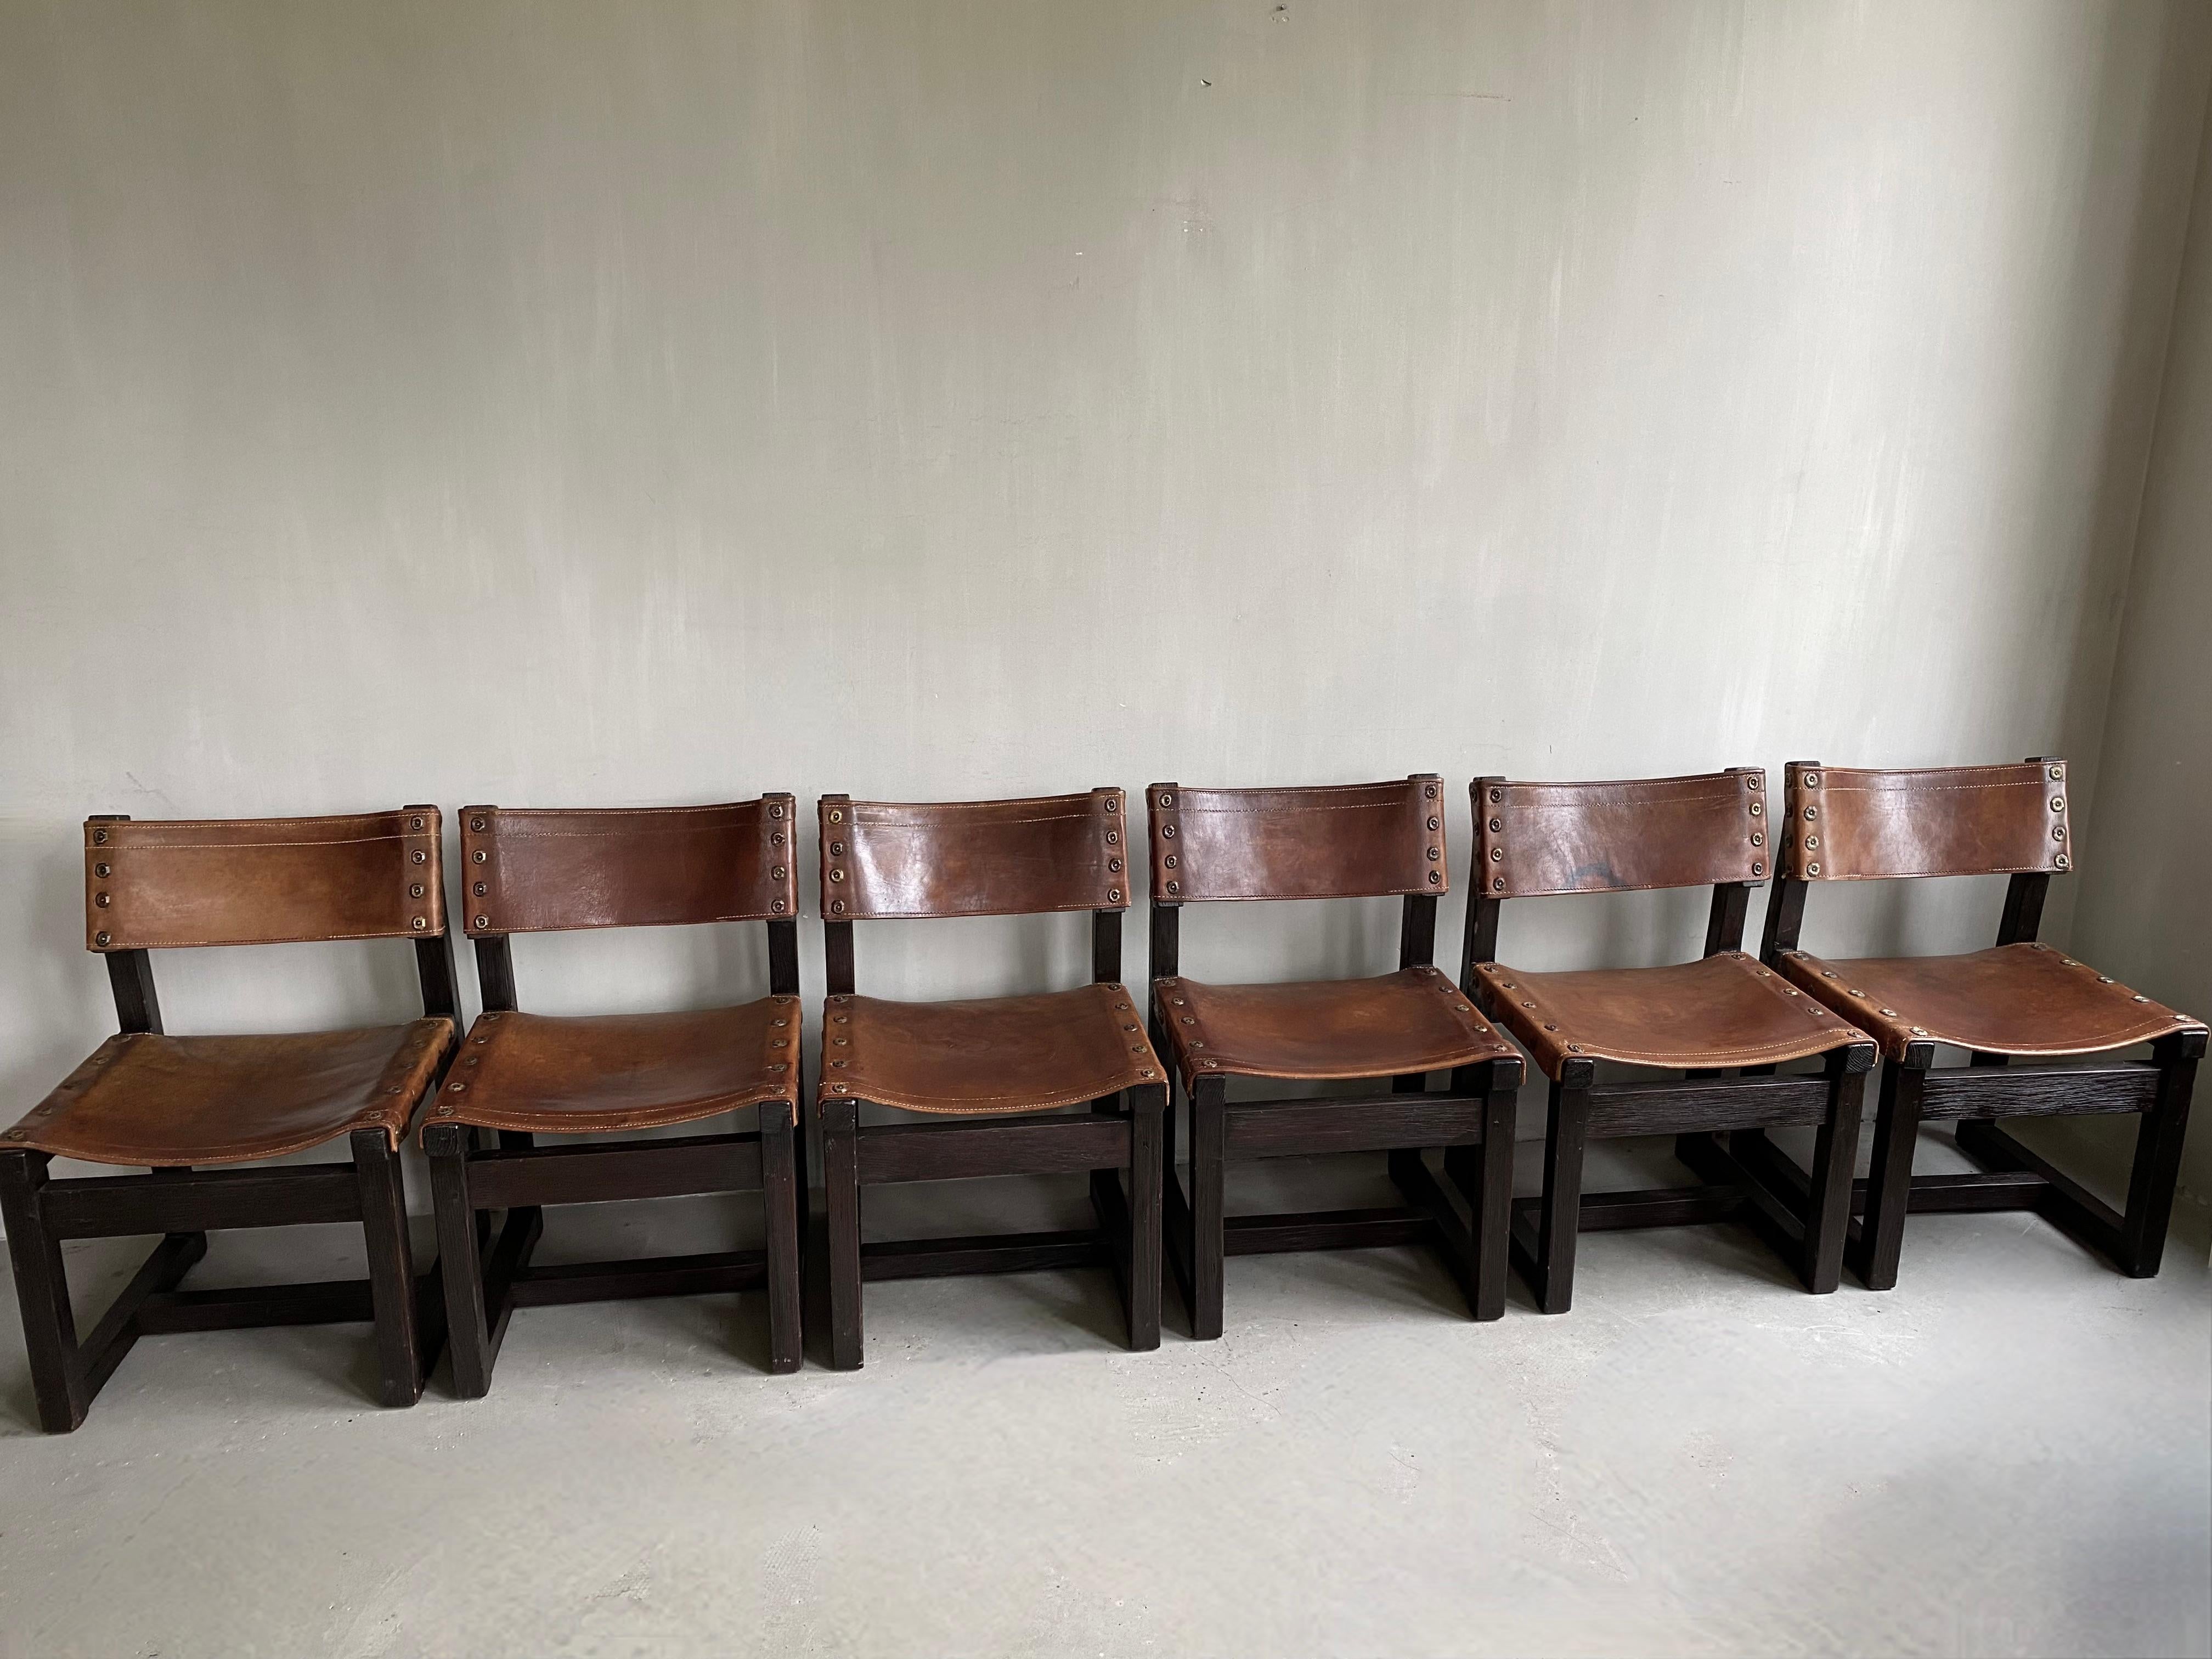 Exclusive set of 6 Spanish chairs from Biosca. Completely original and the saddle leather has a beautiful used look. Wooden frame is ebonized.
Warm minimalism that looks great with a table, as well as as an armchair in a sitting area. Very